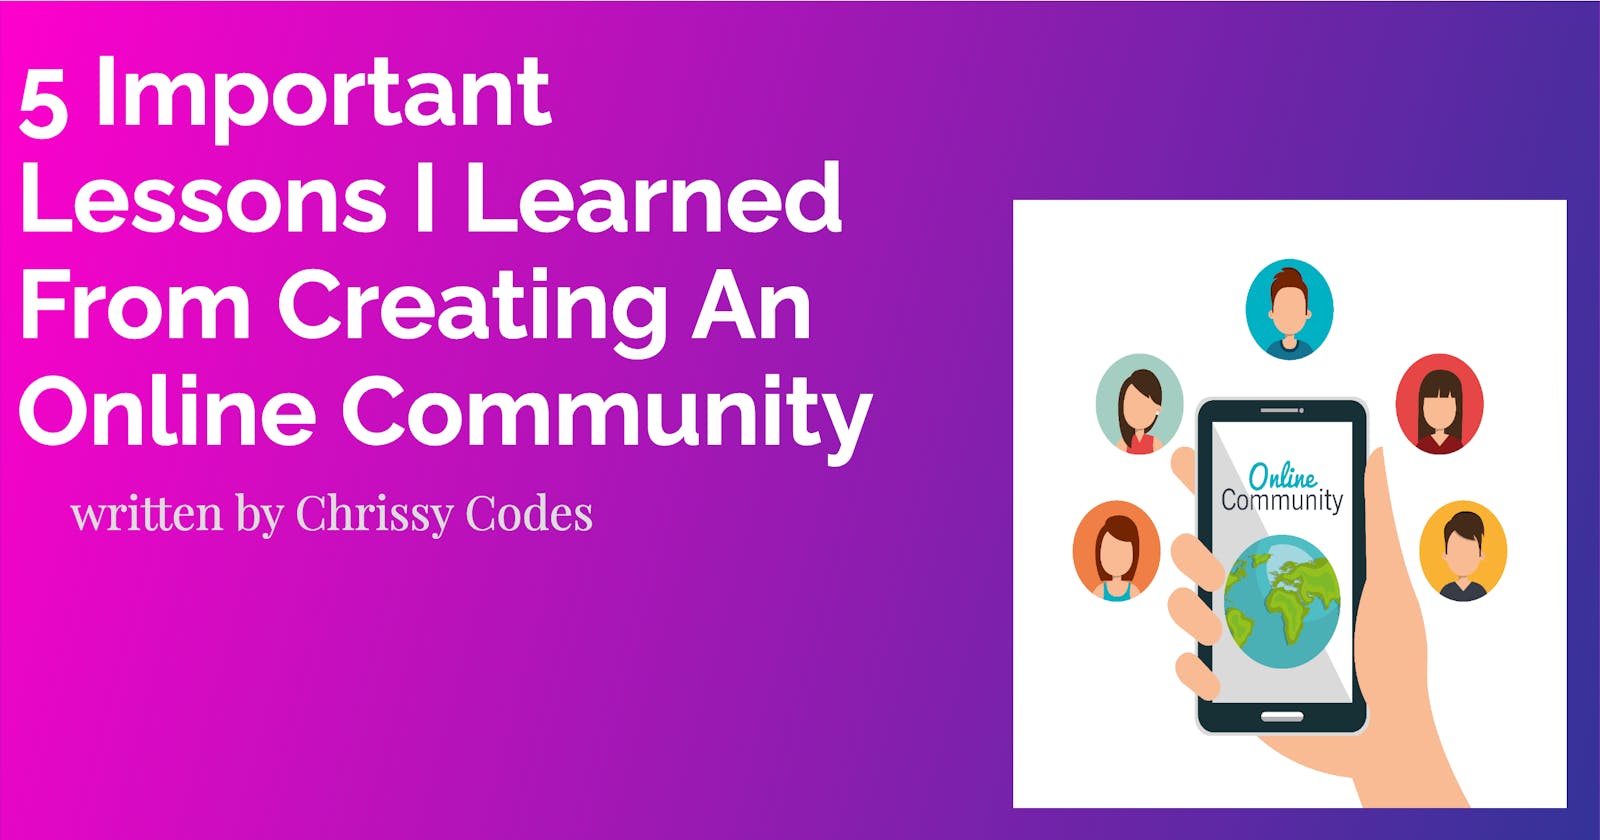 5 Important Lessons I Learned From Creating An Online Community